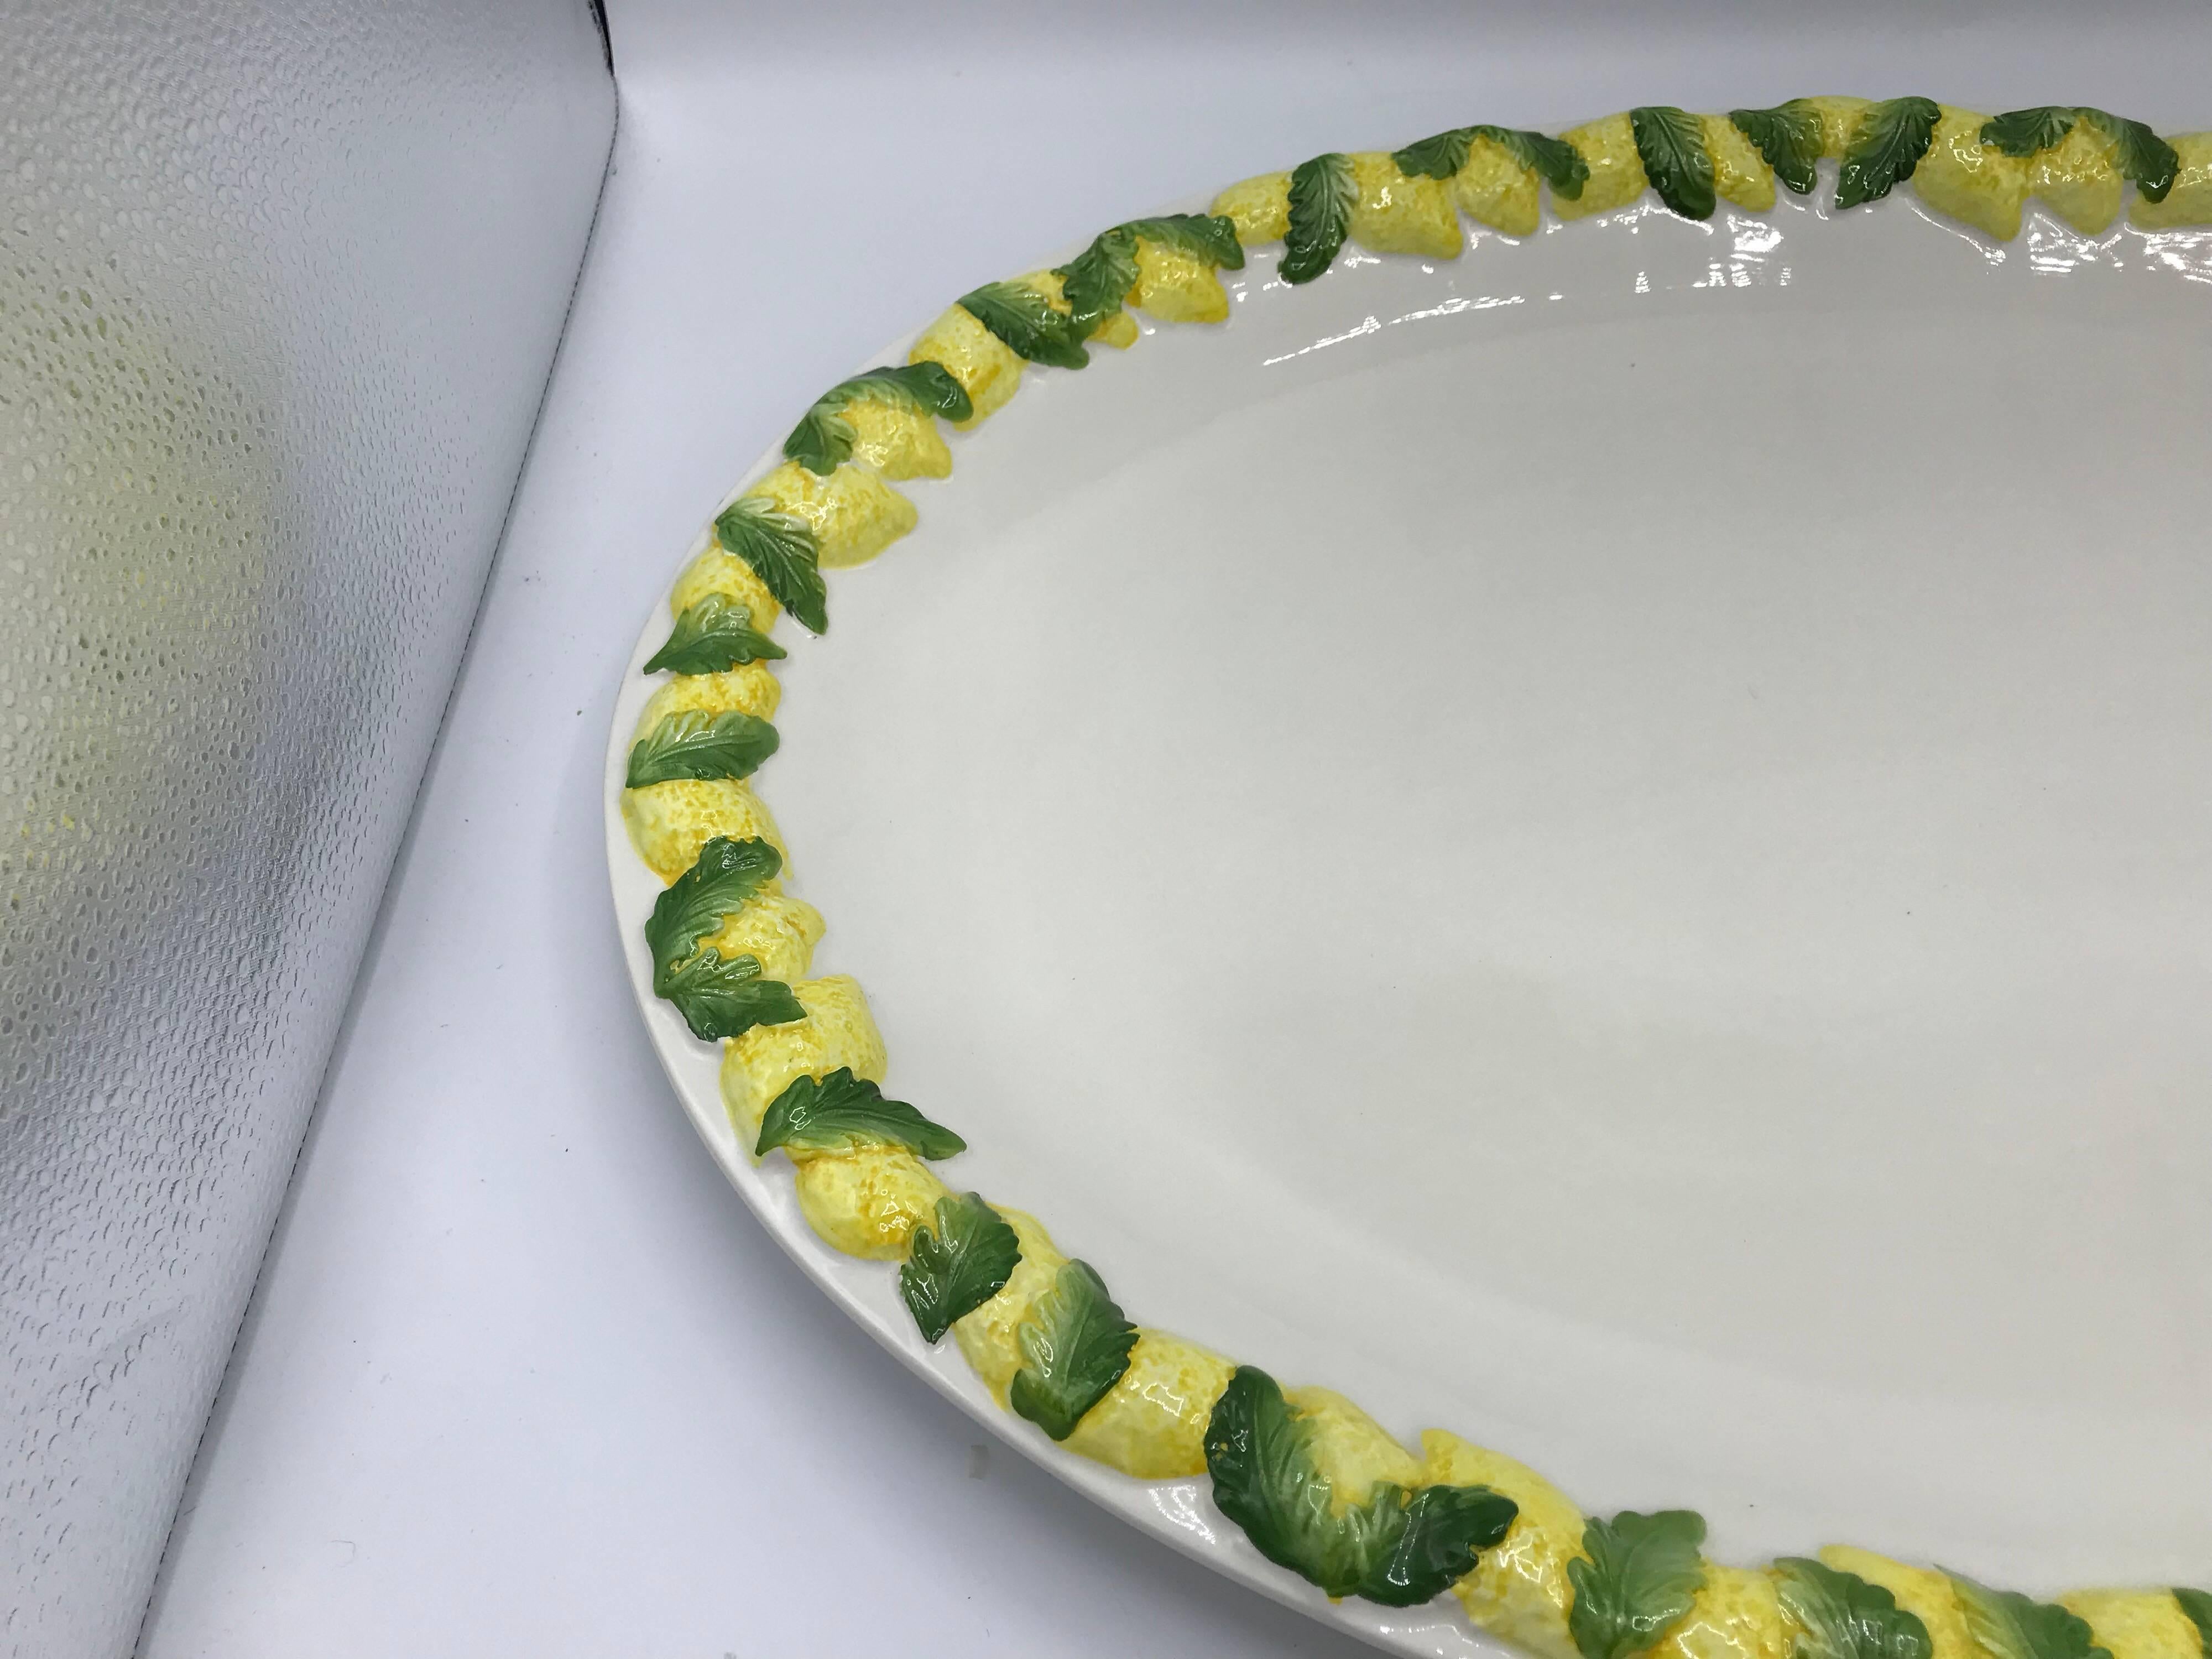 Listed is a stunning, 1960s Italian ceramic serving tray or platter. The piece has a gorgeous, sculptural lemon motif along the border. Heavy. Marked ‘Made in Italy’ on backside (see last photo).